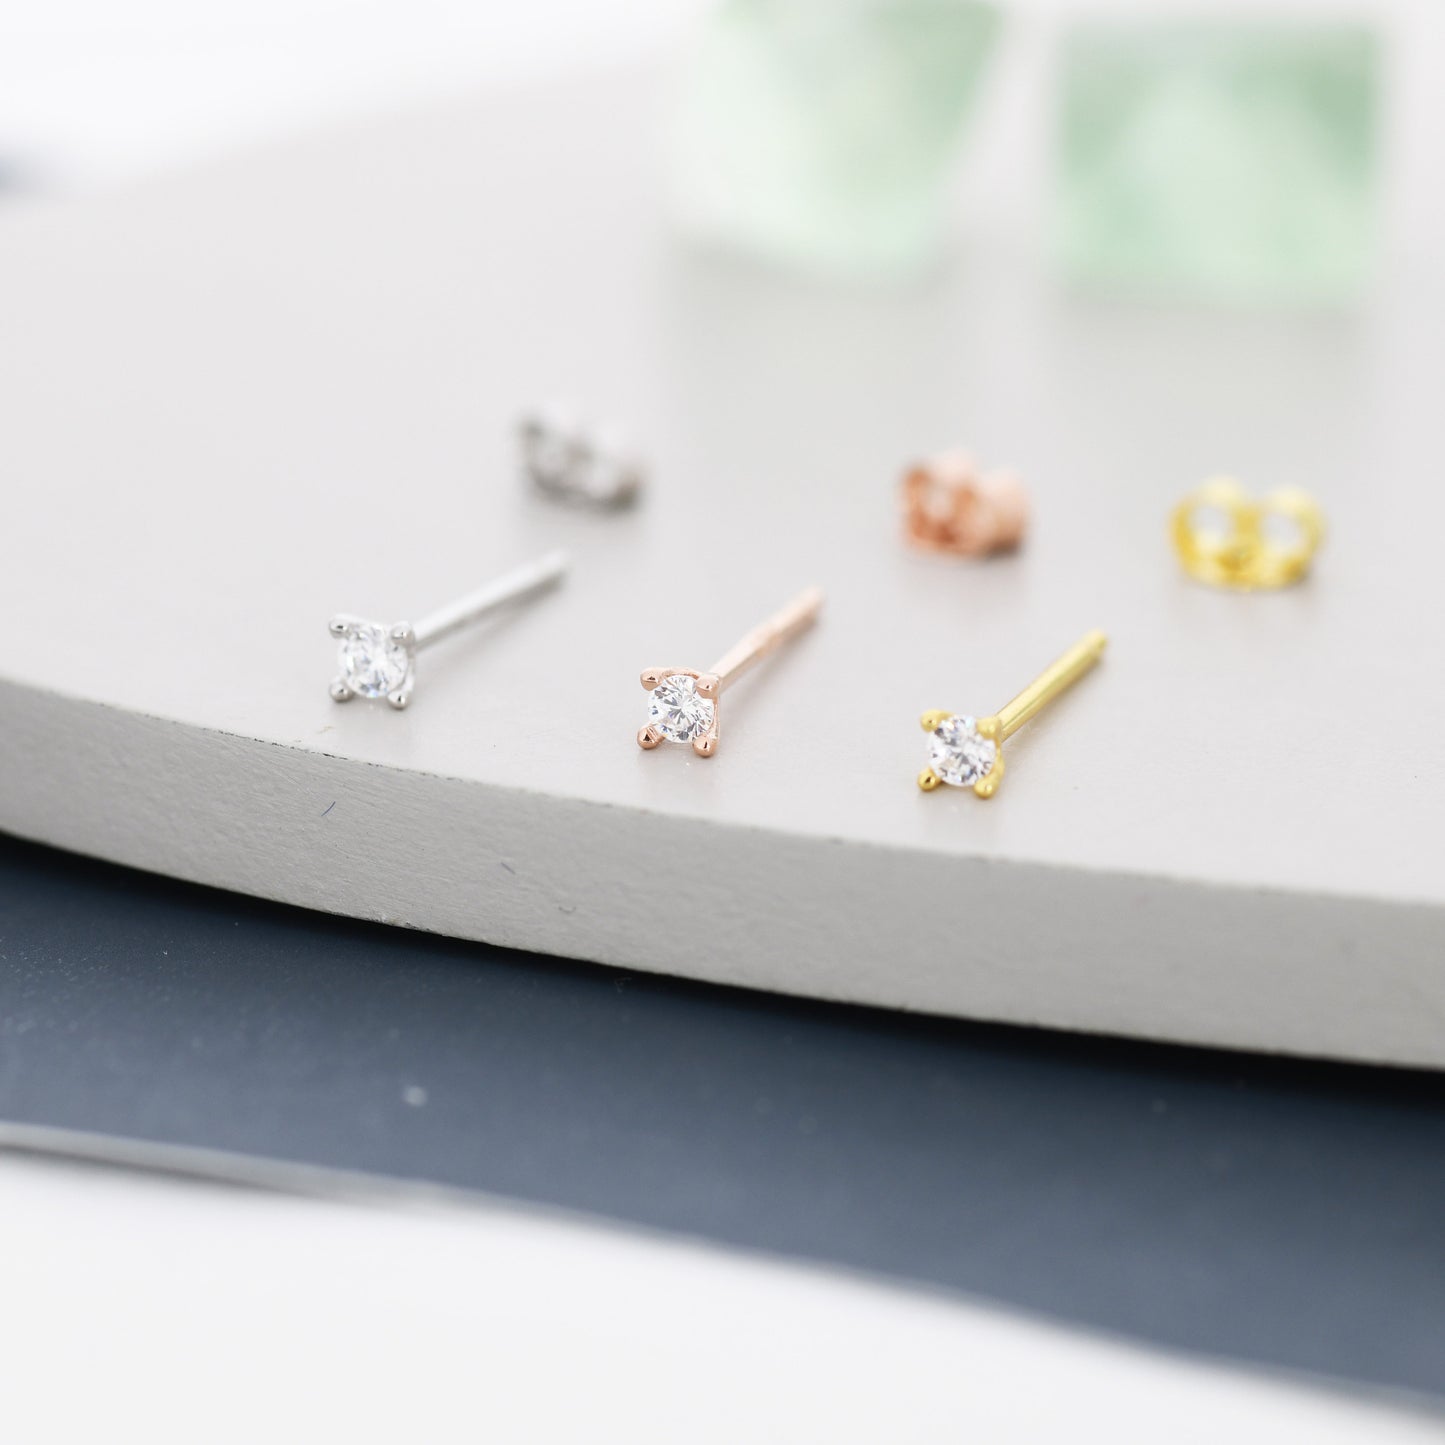 Barely Visible 2mm CZ Stud in Sterling Silver, Silver, Gold or Rose Gold,  Extra Tiny CZ Stud